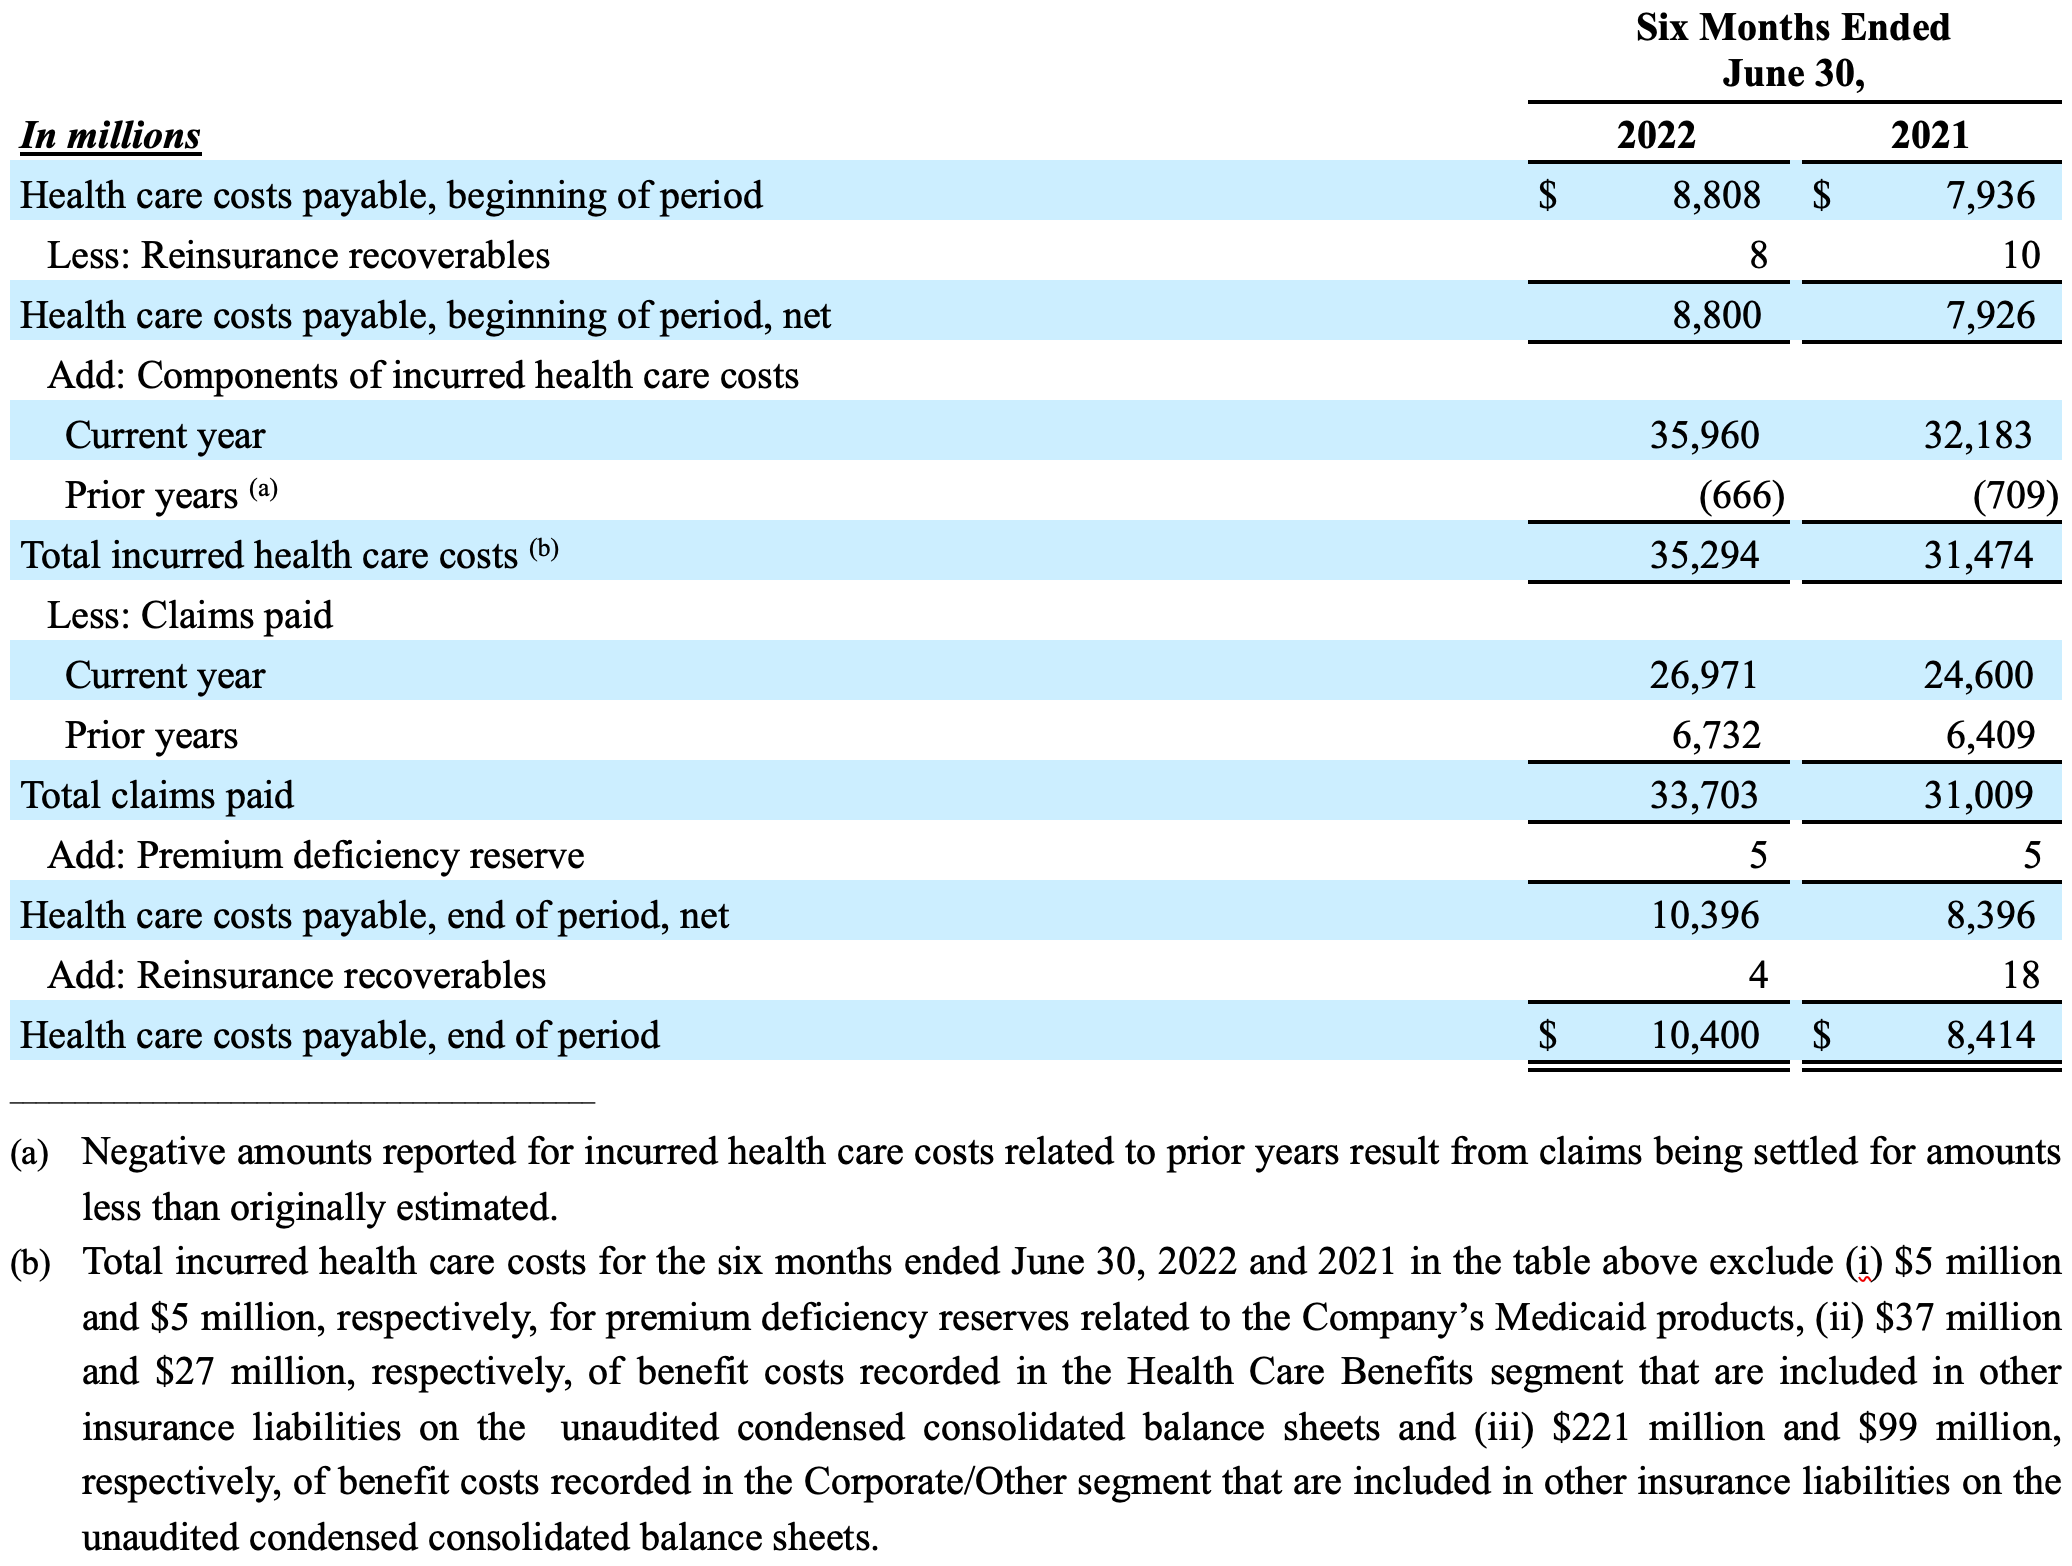 Table showing the components of the change in health care costs payable during the six months ended June 30, 2022 and 2021